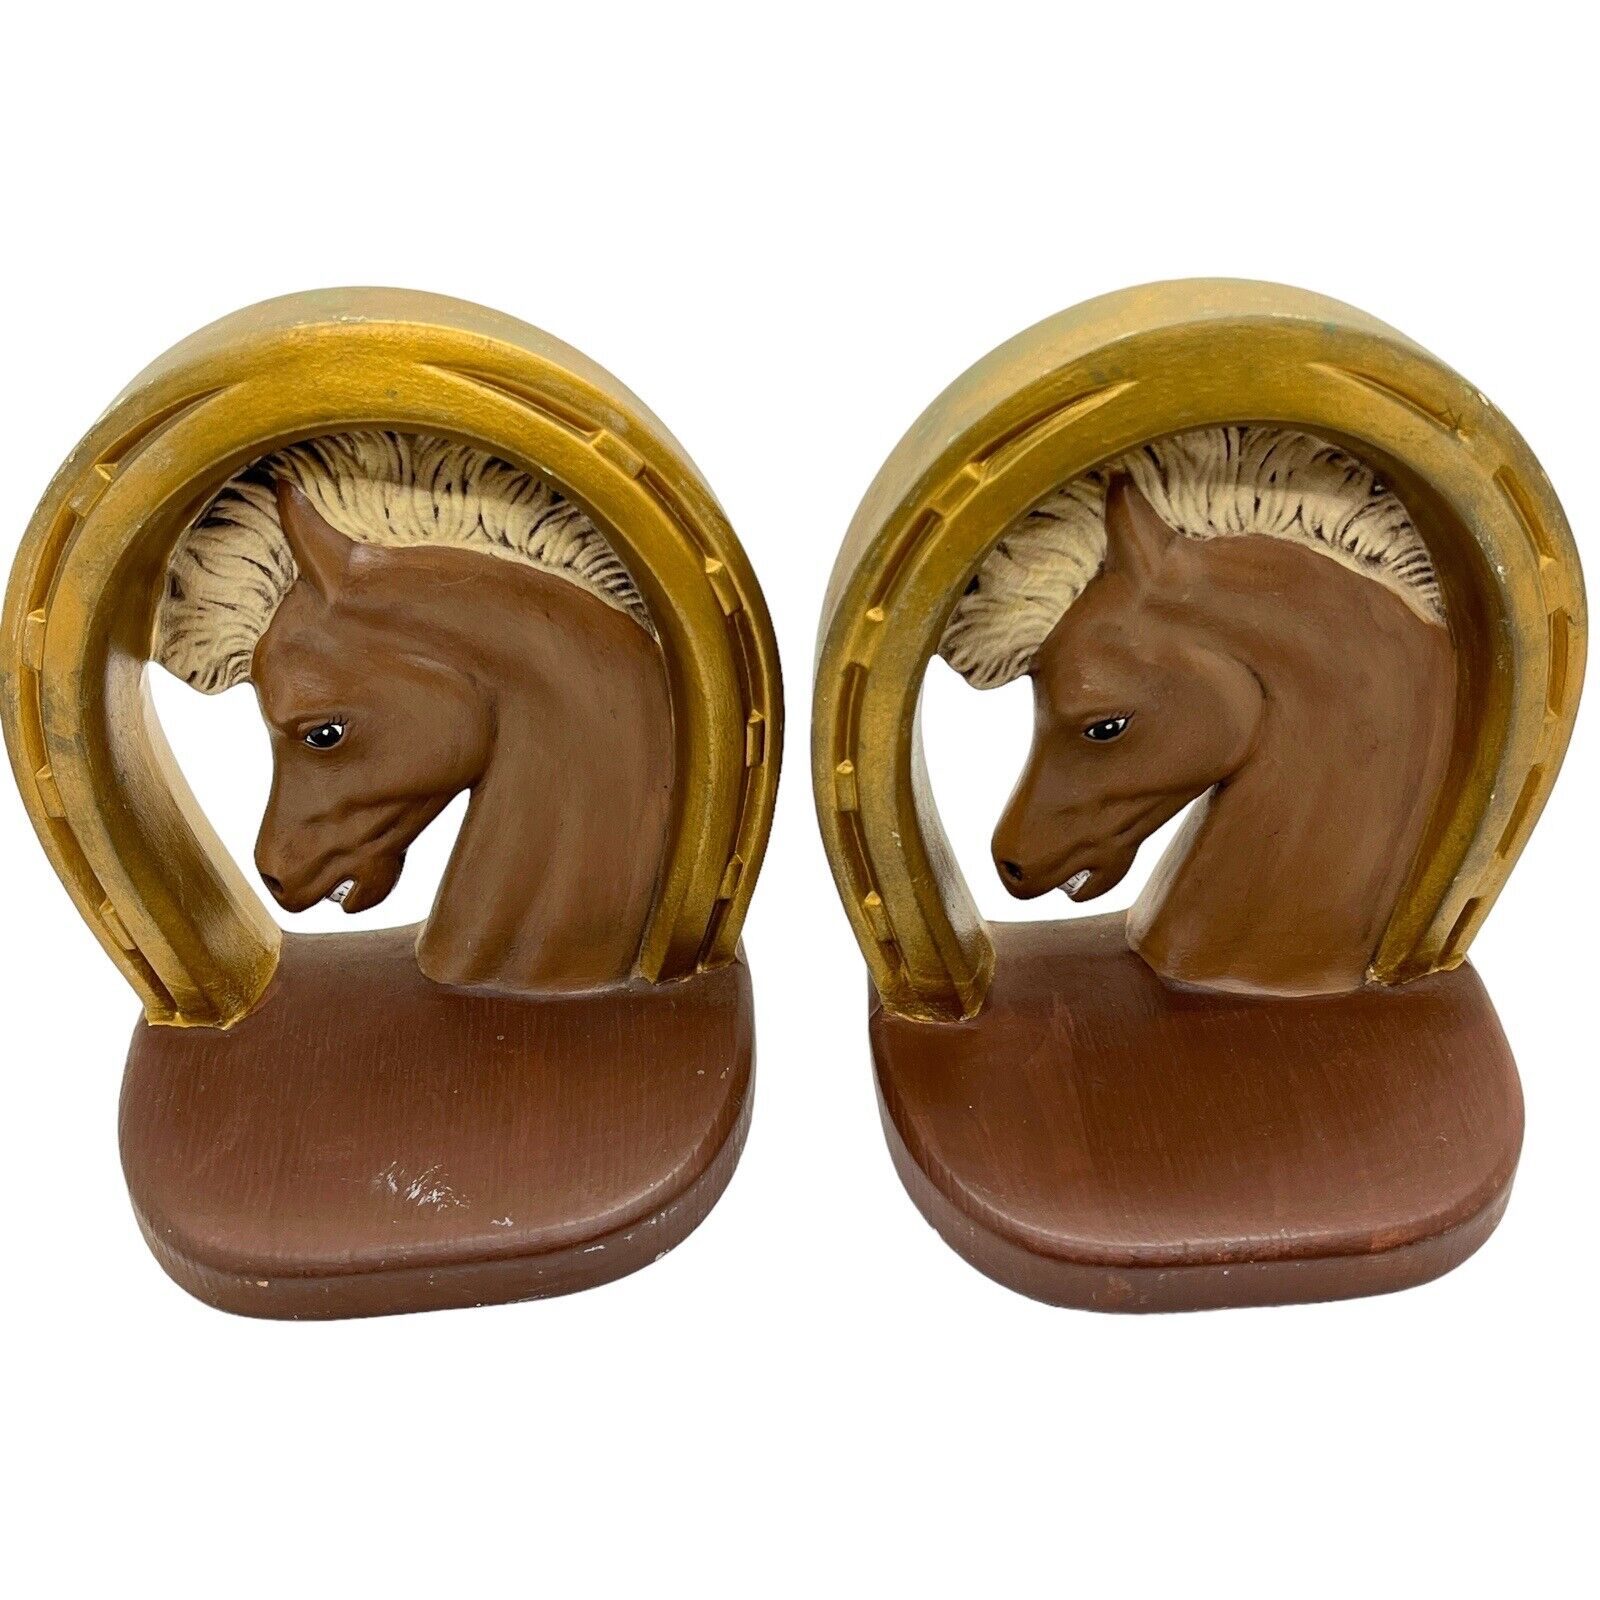 Horse & Lucky HorseShoe Bookends Painted Vintage Retro Ceramic Chalkware Kitsch